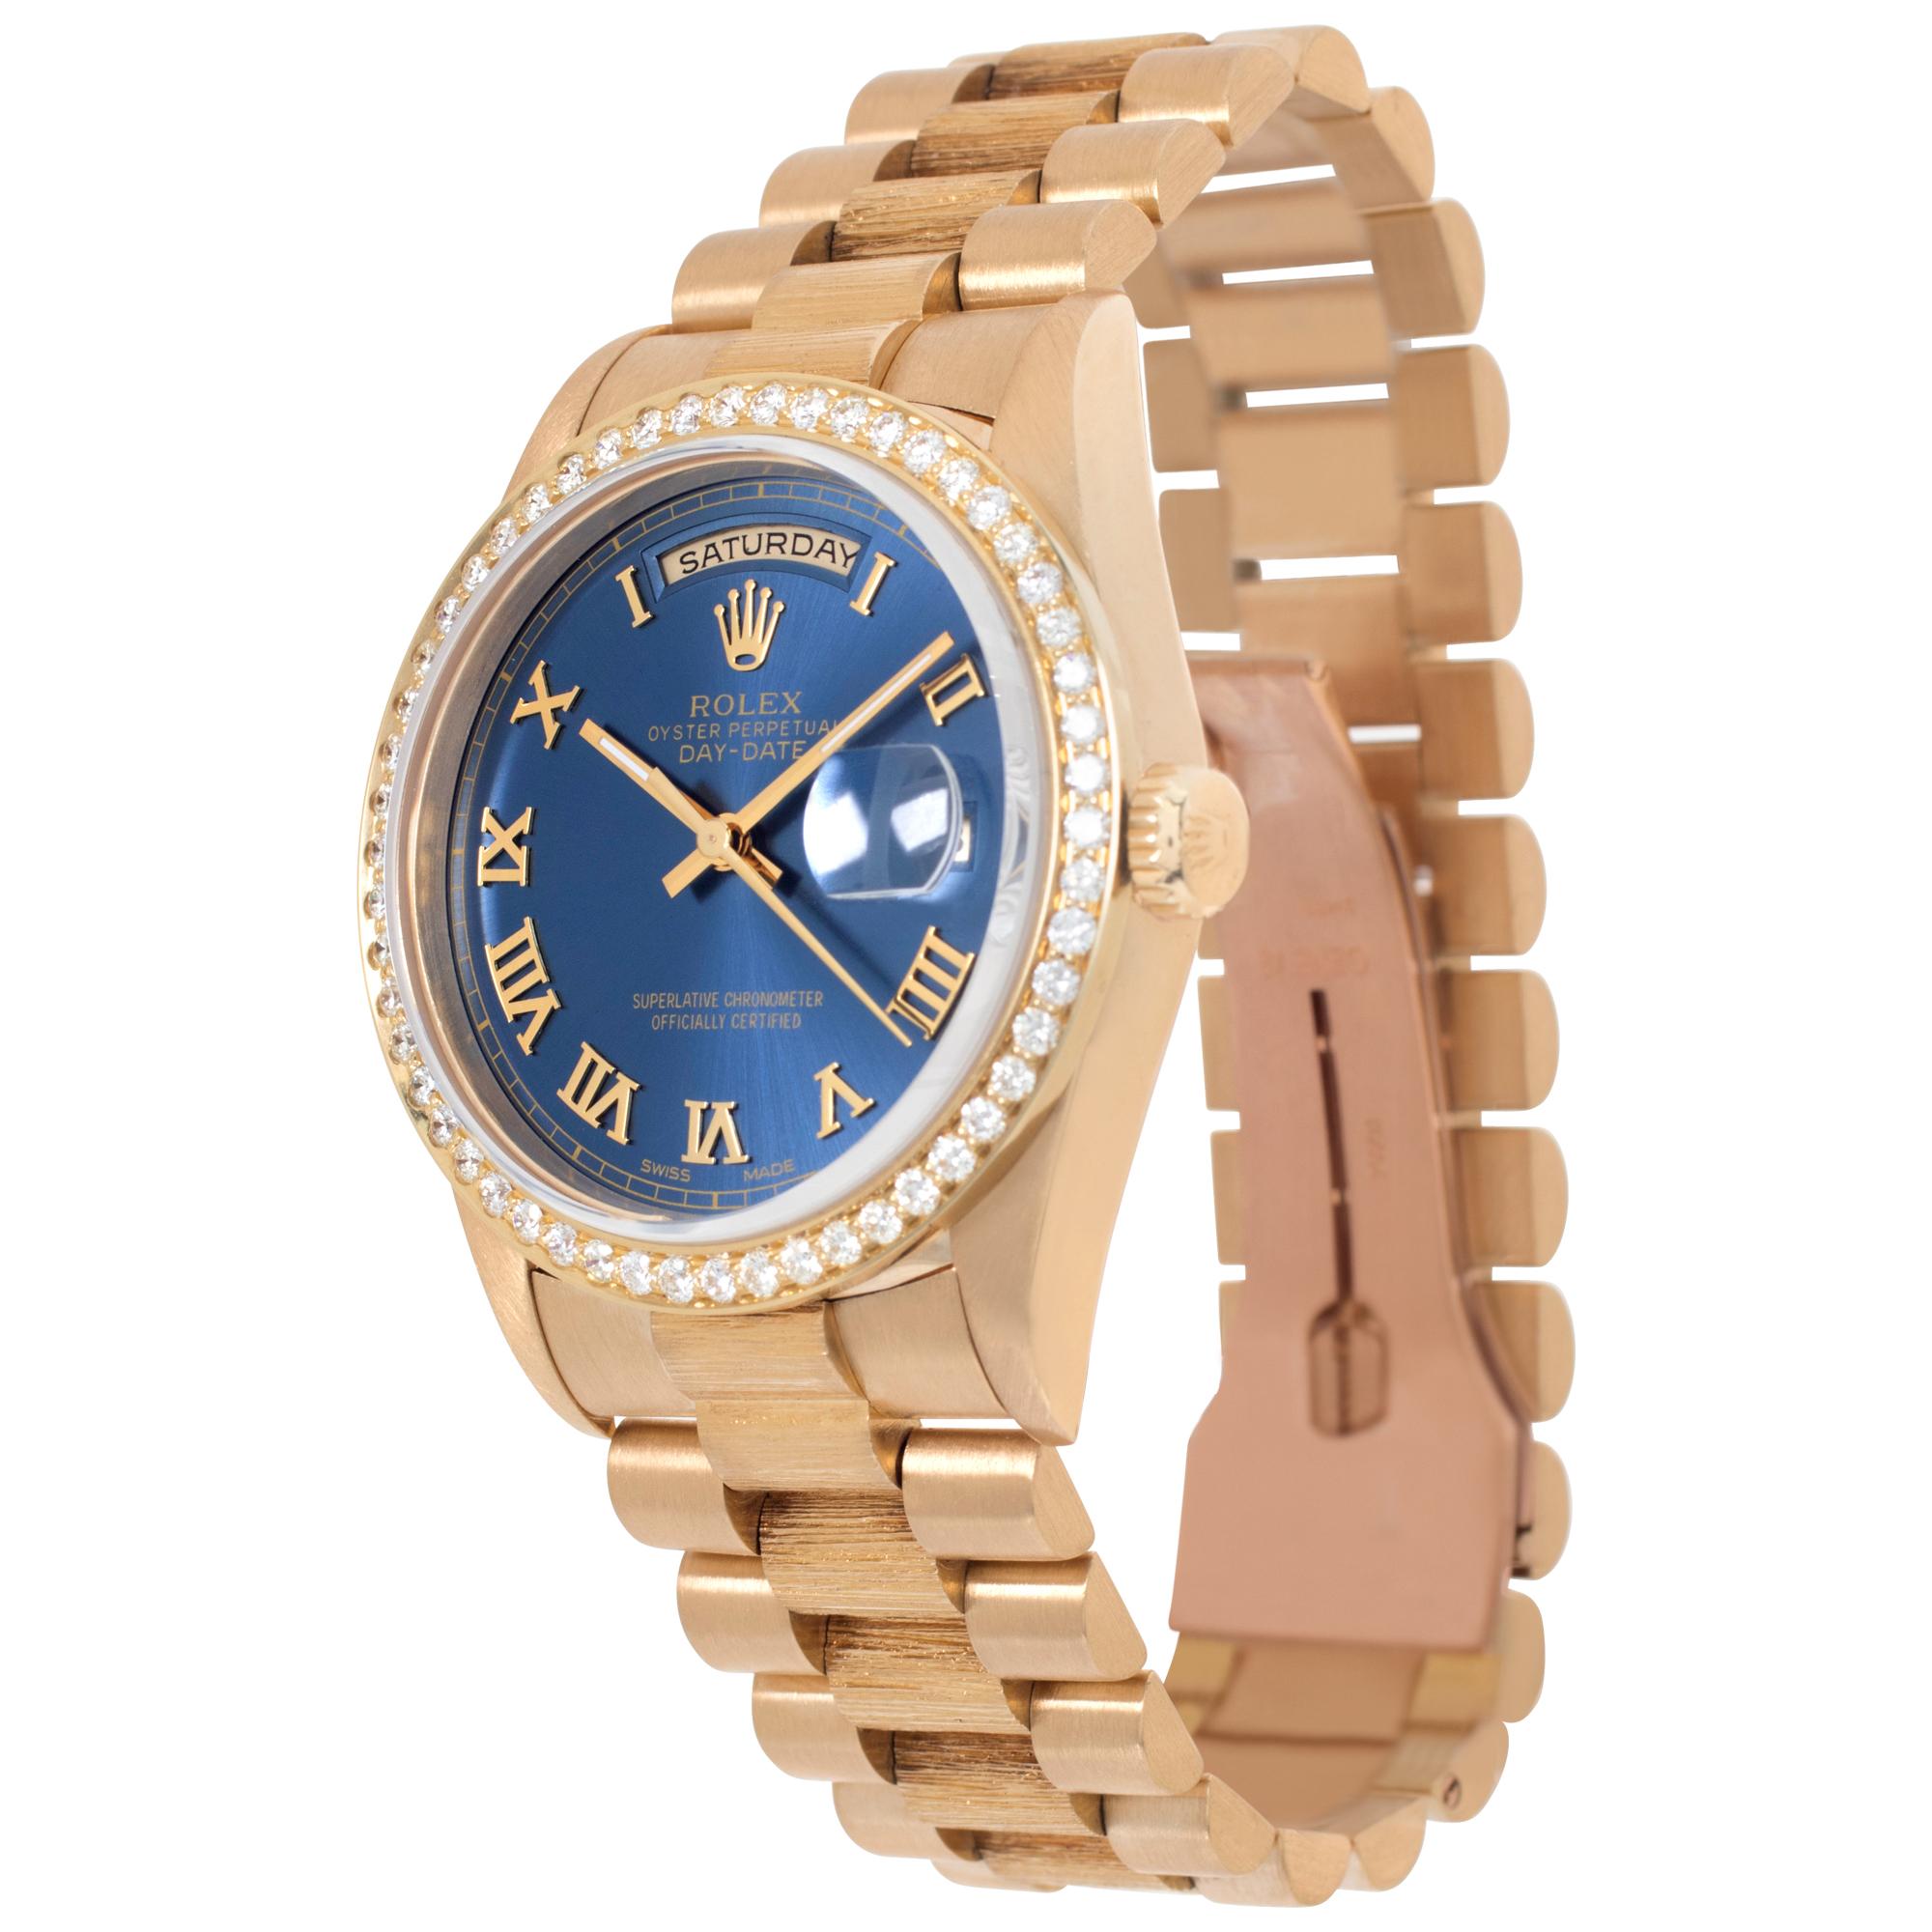 Rolex Day-Date in 18k yellow gold with factory original bark finish President band with custom blue dial with applied Roman numerals and custom diamond bezel. Auto w/ sweep seconds, date and day. 36 mm case size. **Bank wire only at this price** Ref